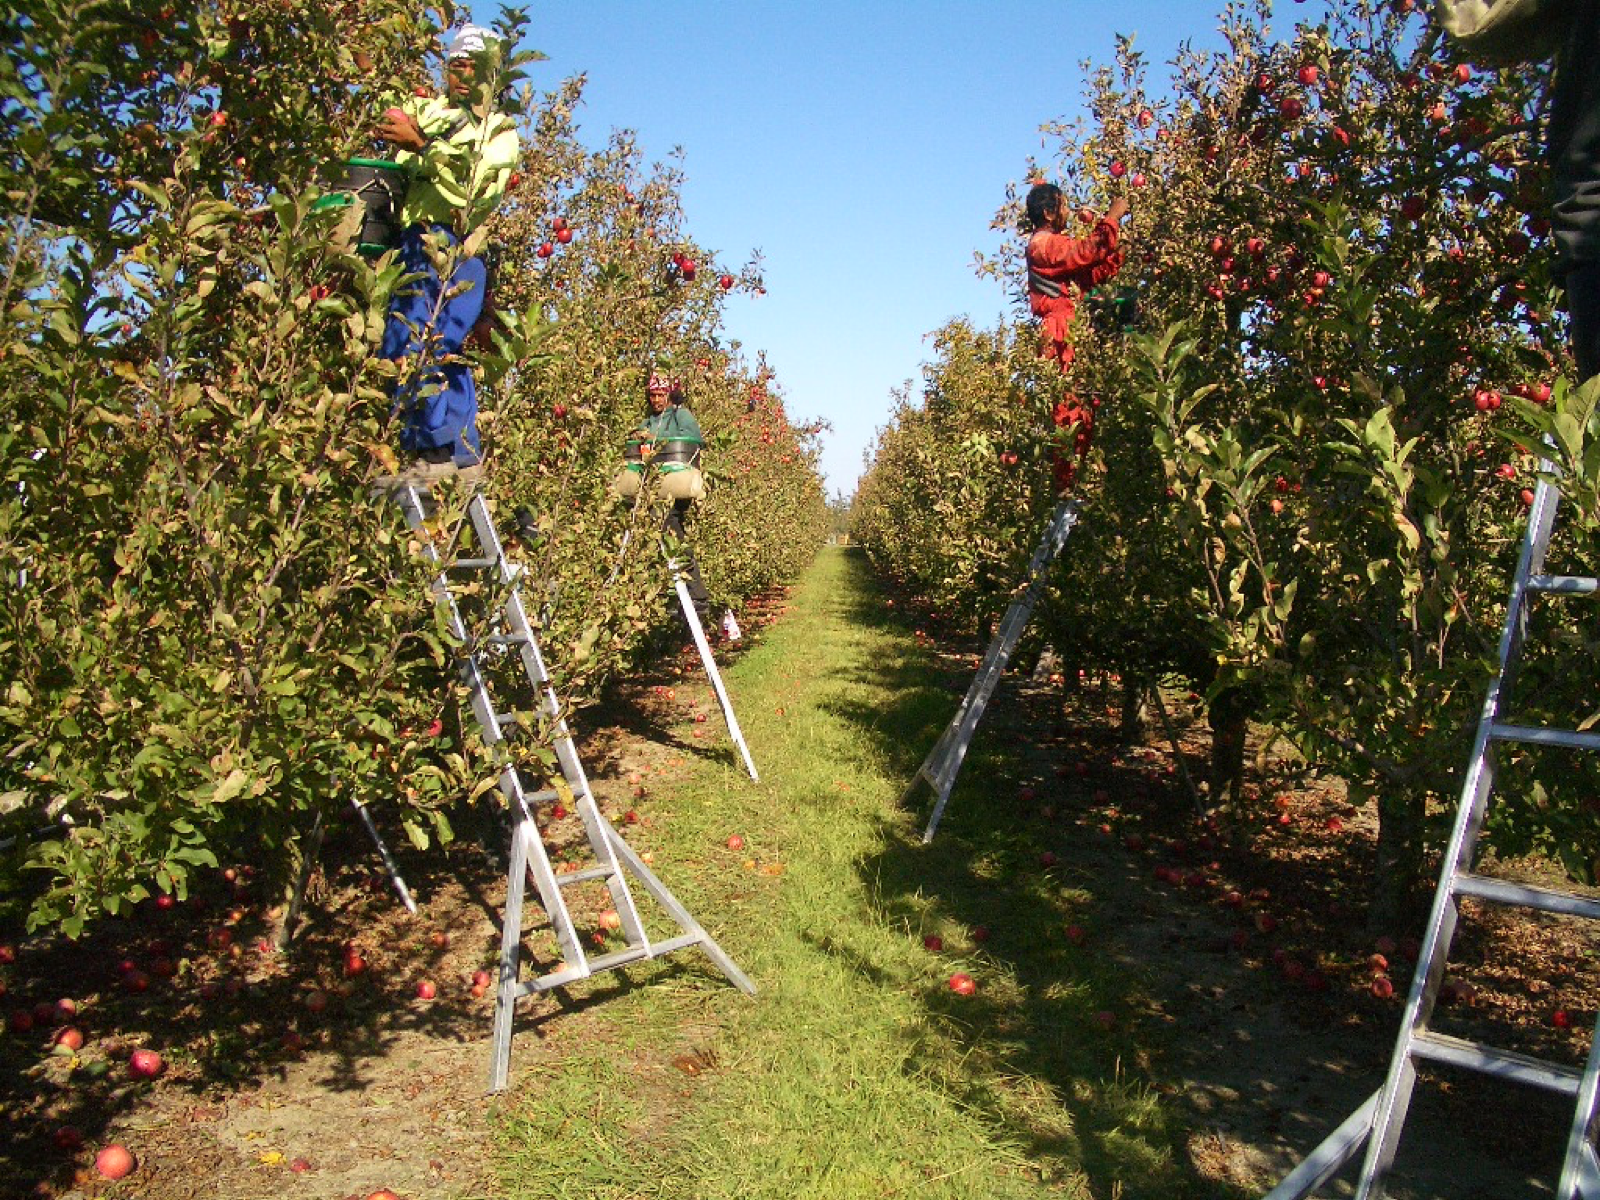 Samoan workers on ladders in a New Zealand orchard